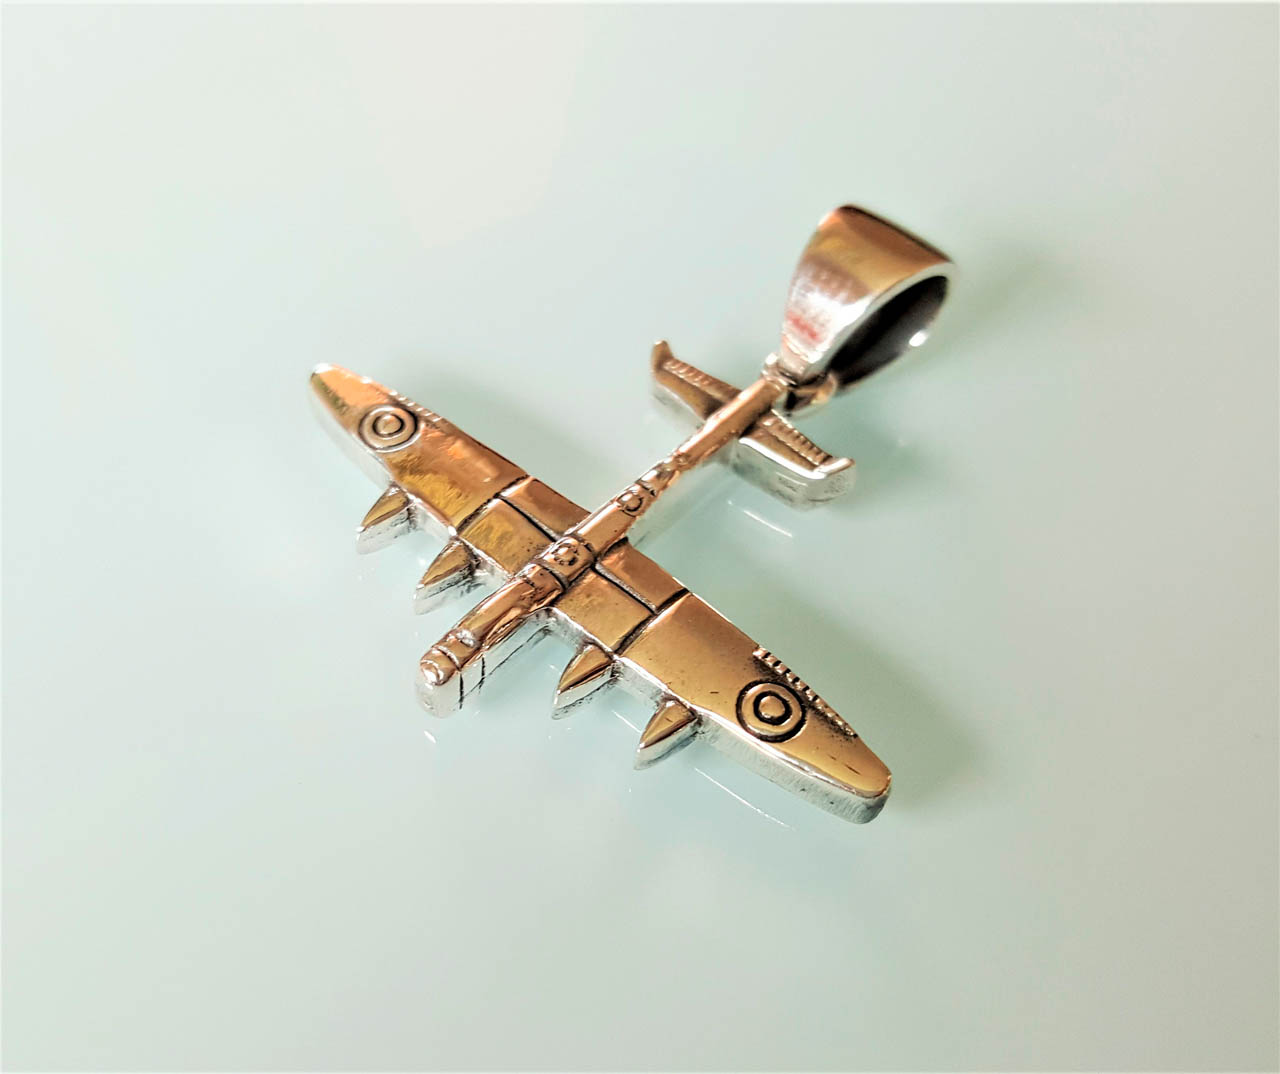 Spitfire Airplane Necklace 925 Sterling Silver Gifts for WWII -  Norway